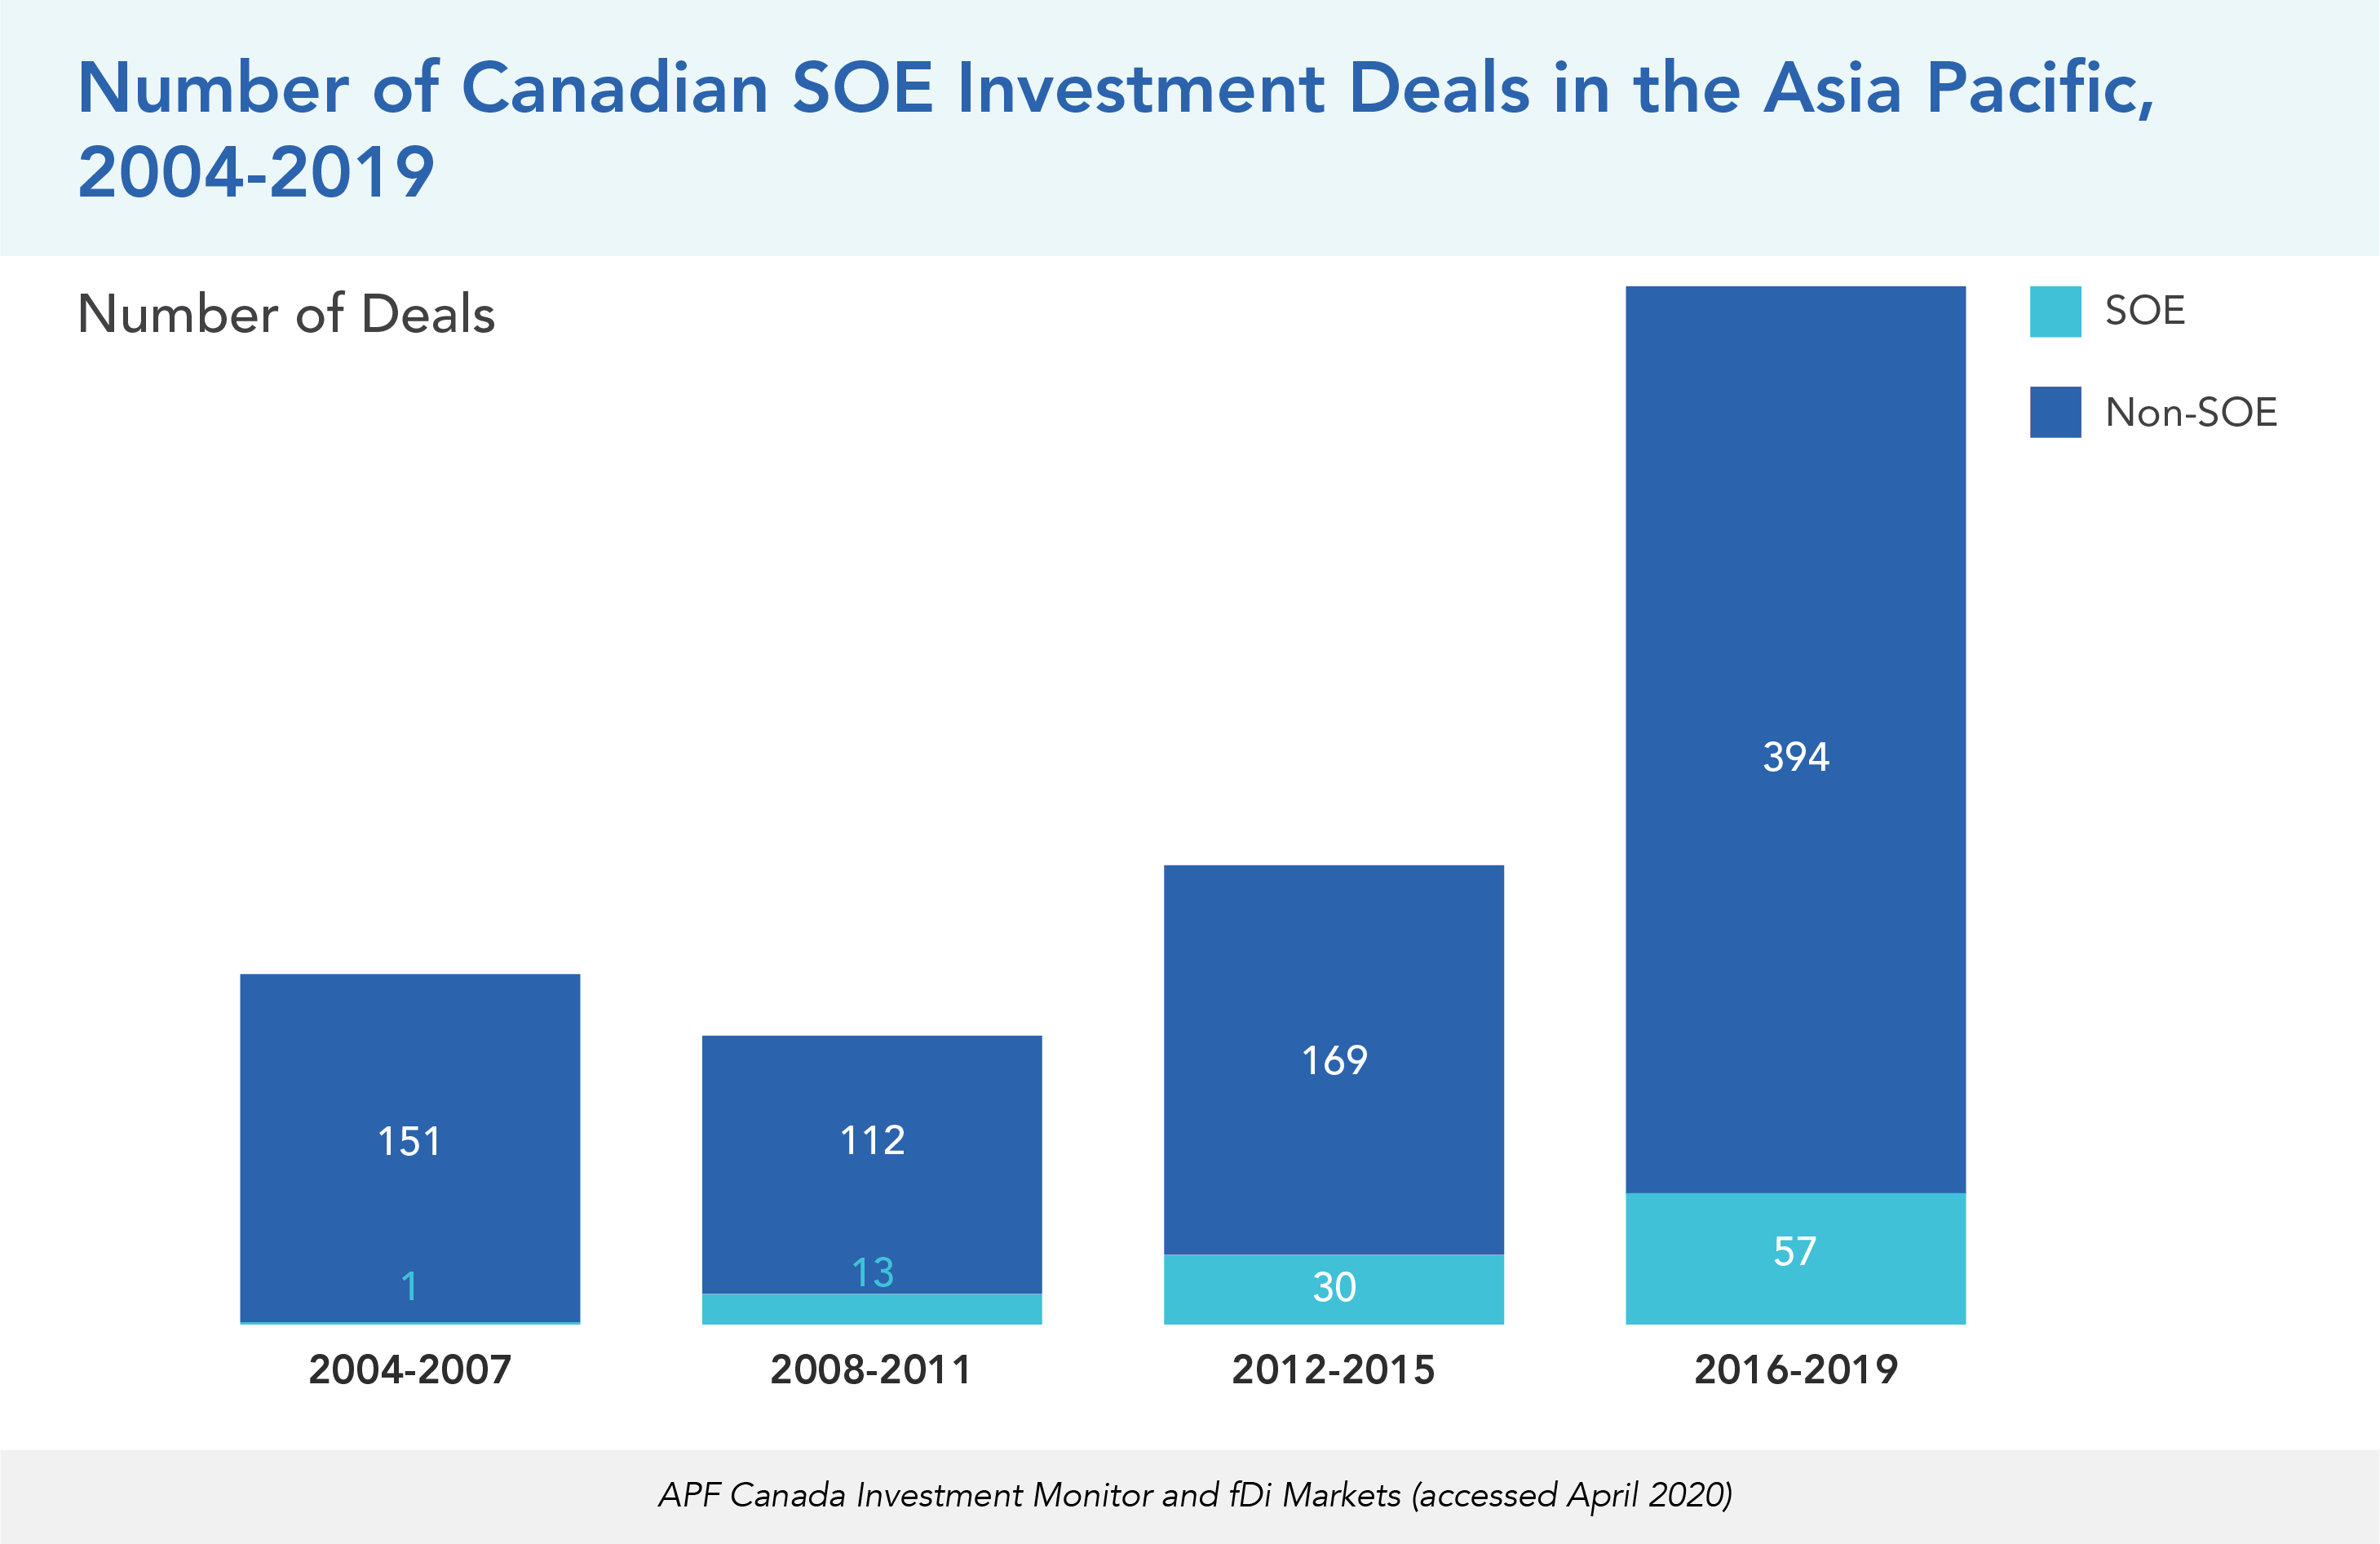 Number of Canadian SOE Investment Deals in the Asia Pacific, 2004-2019